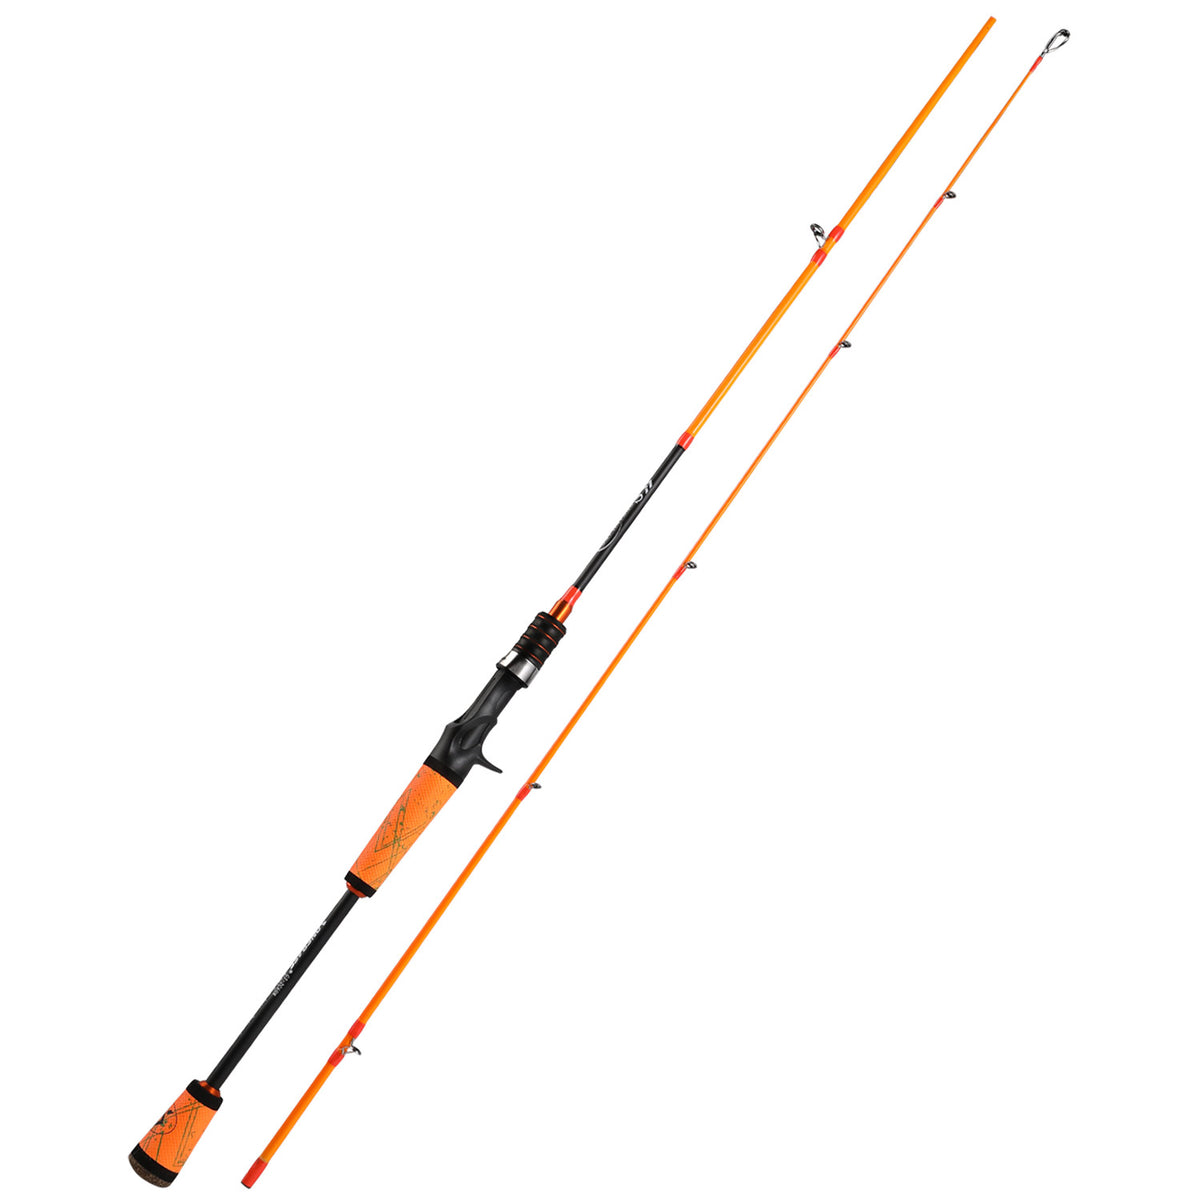 One Bass Fishing Pole 24 Ton Carbon Fiber Casting and Spinning Rods - Two  Pieces, SuperPolymer Handle Fishing Rod for Bass Fishing